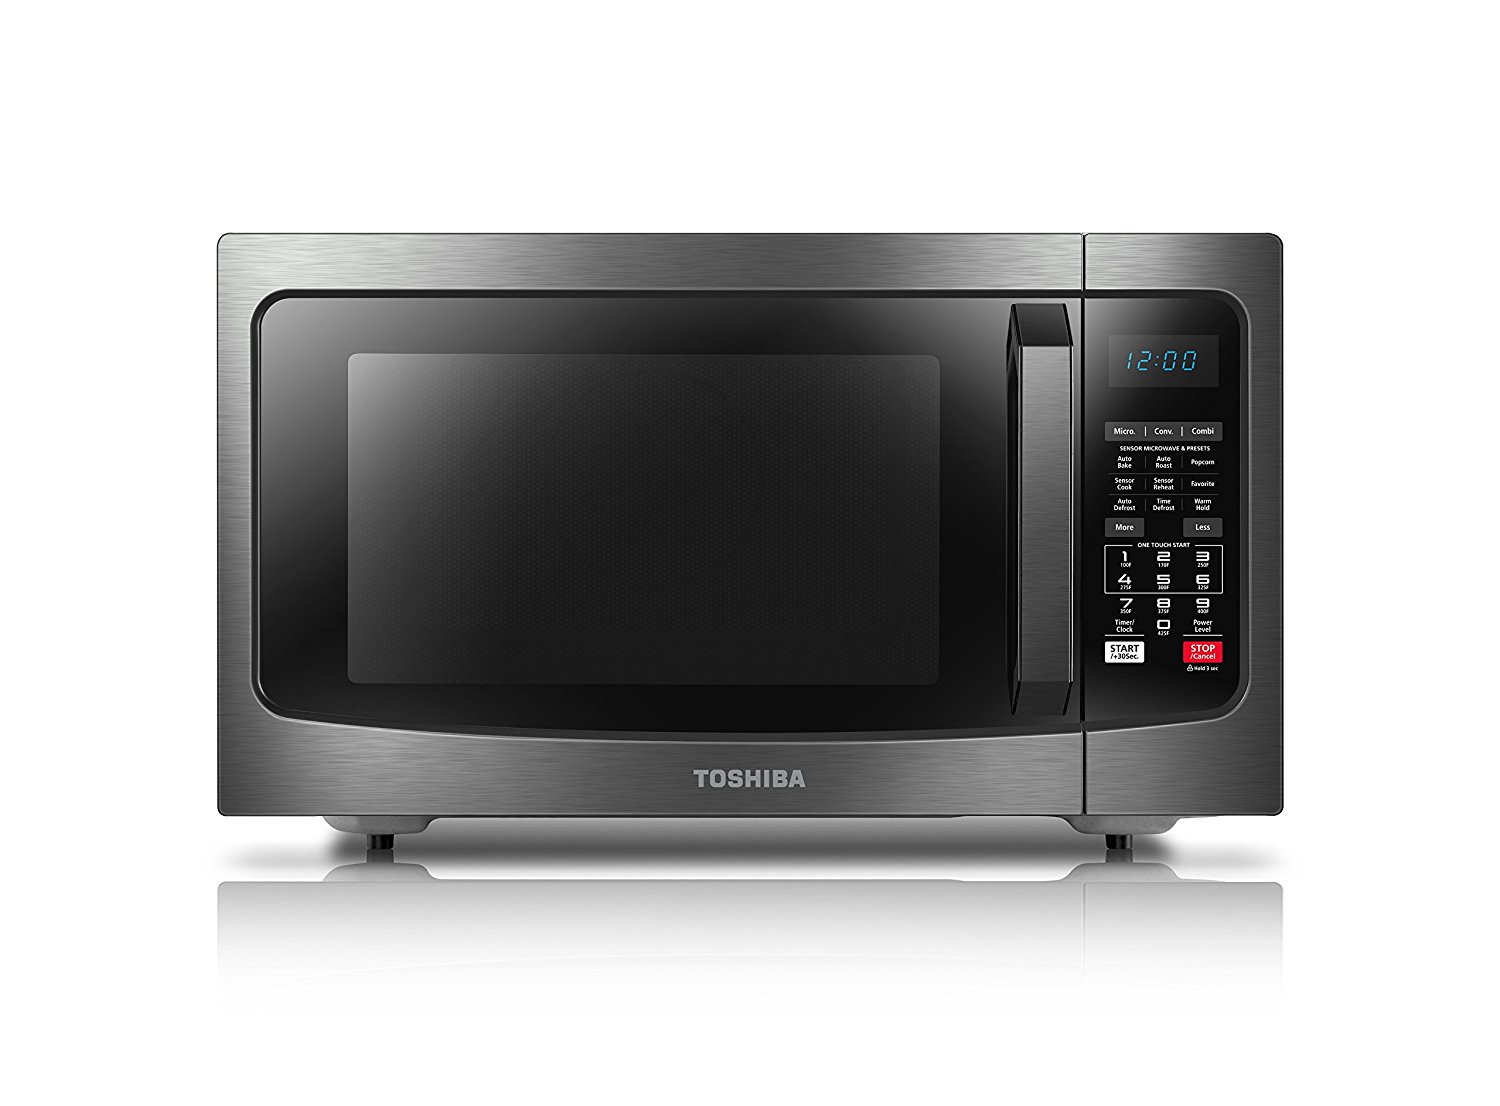 Toshiba EC042A5C-BS Convection Microwave Oven, 1.5 Cu.ft, Black Stainless Steel